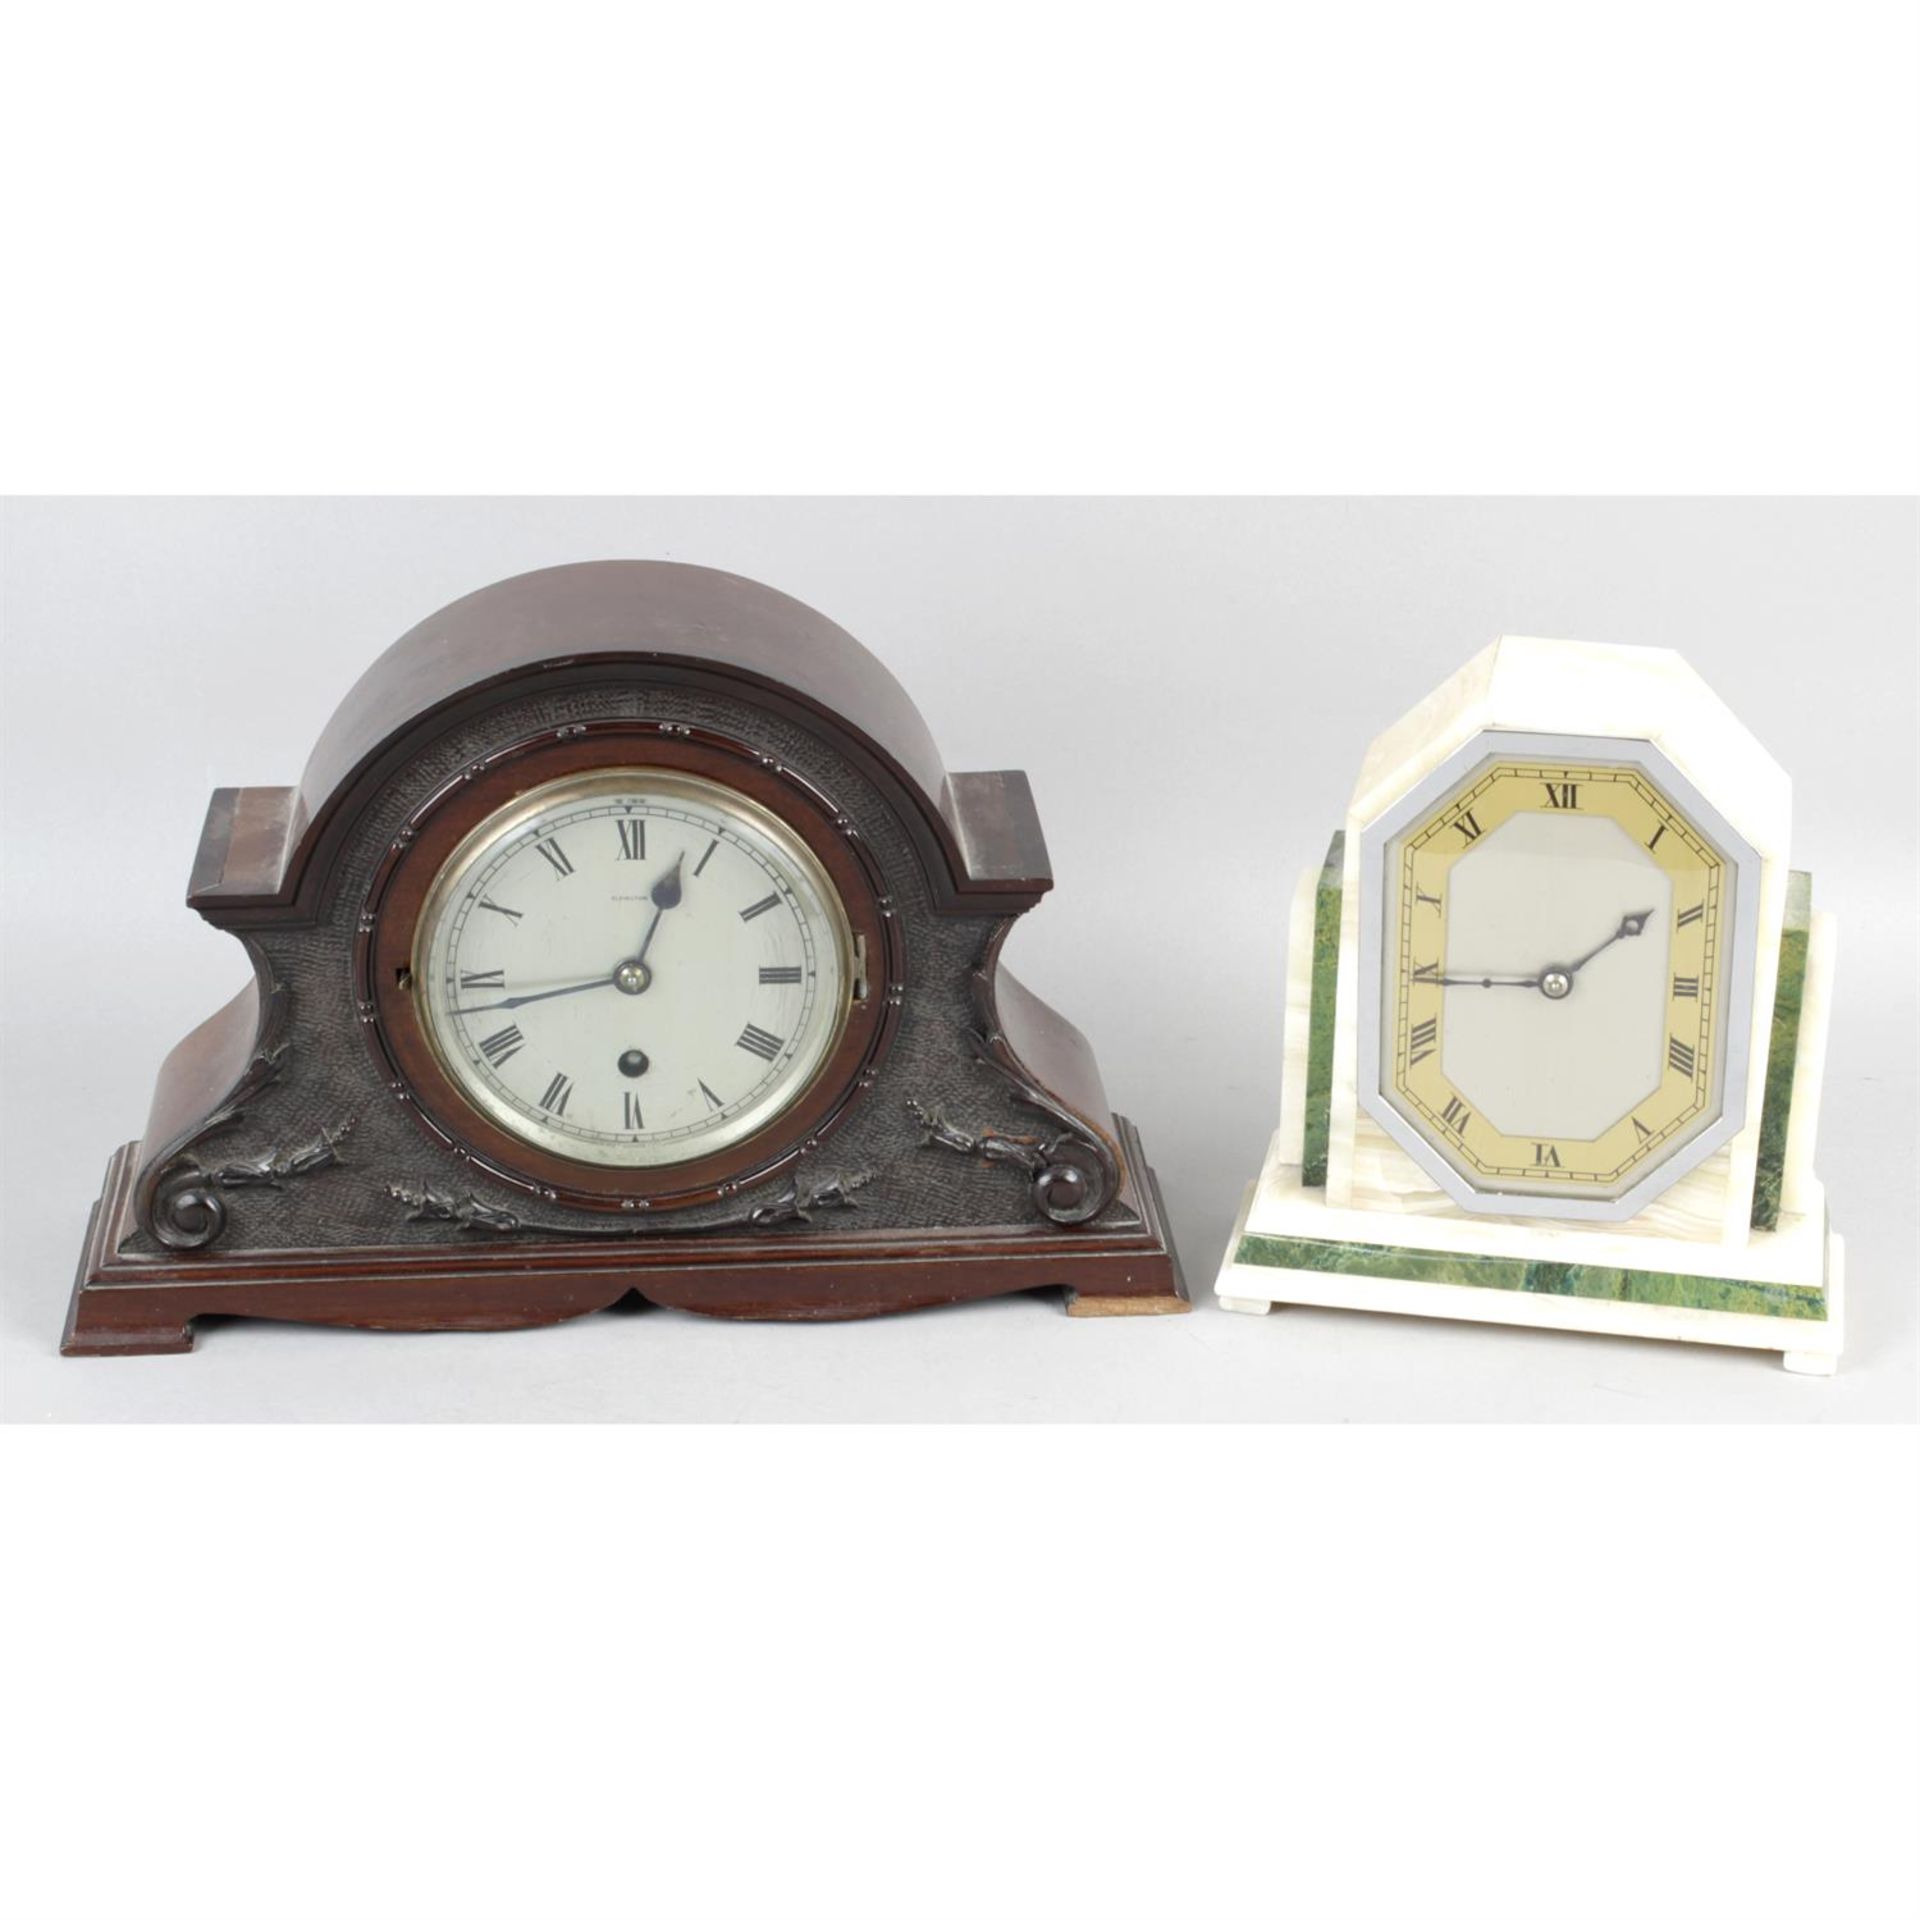 An Art Deco marble cased mantel clock and early 20th century mantel clock.